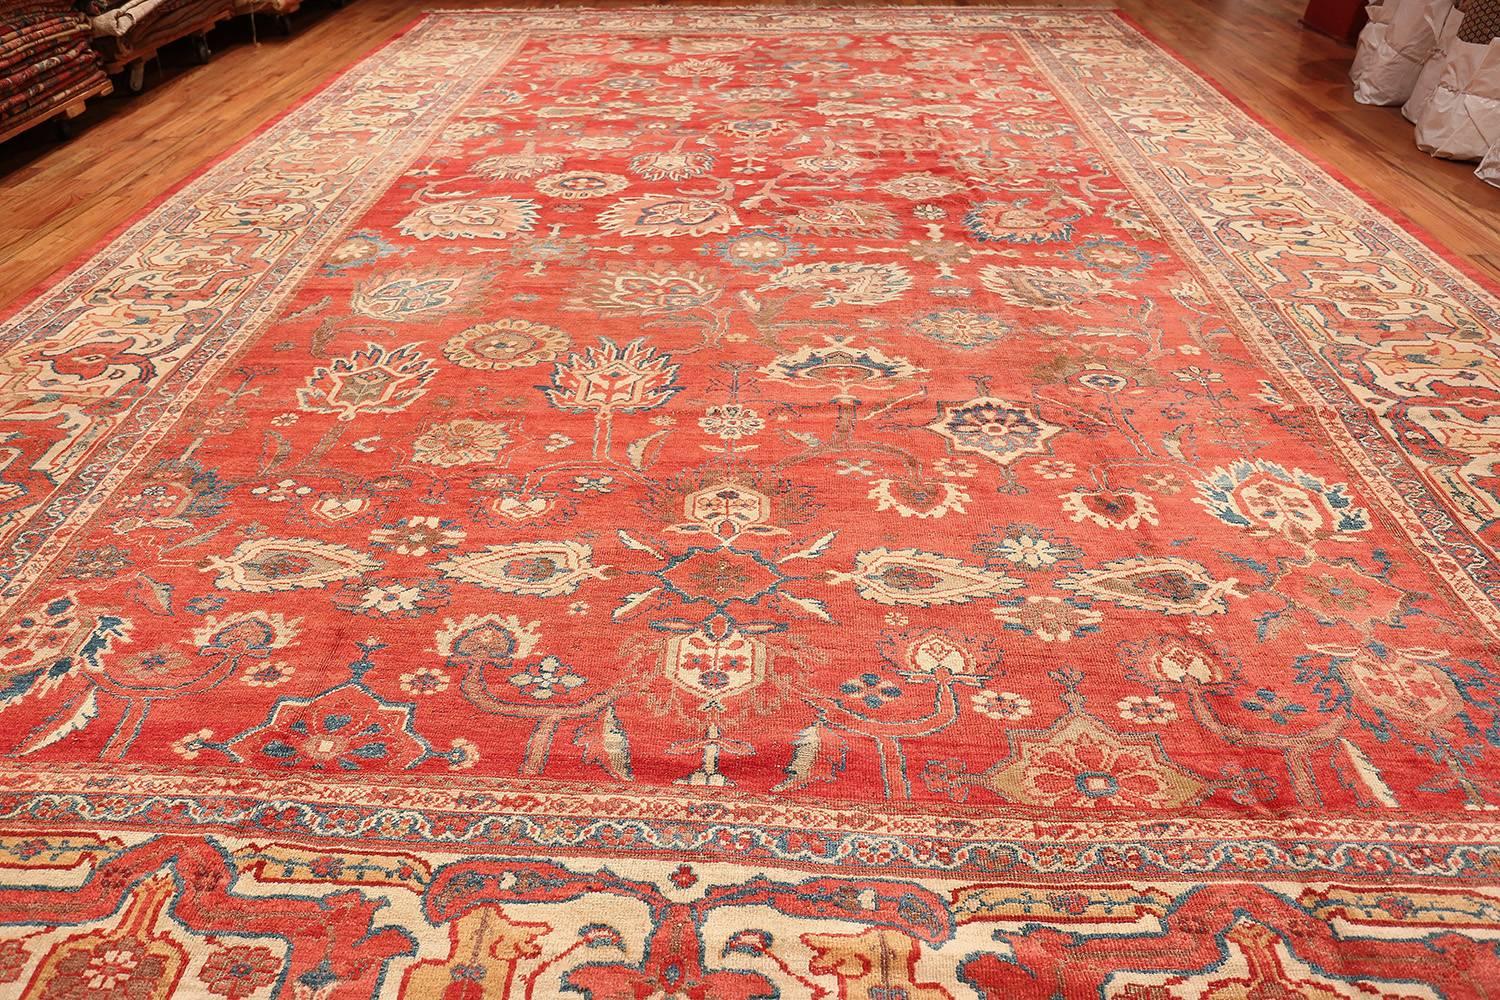 Magnificent Large Oversized Red Antique Persian Sultanabad Rug, Persia, circa Turn of the Twentieth Century. Size: 14 ft x 21 ft (4.27 m x 6.4 m)

This awe inspiring antique Persian Sultanabad rug showcases an outstanding large format all over